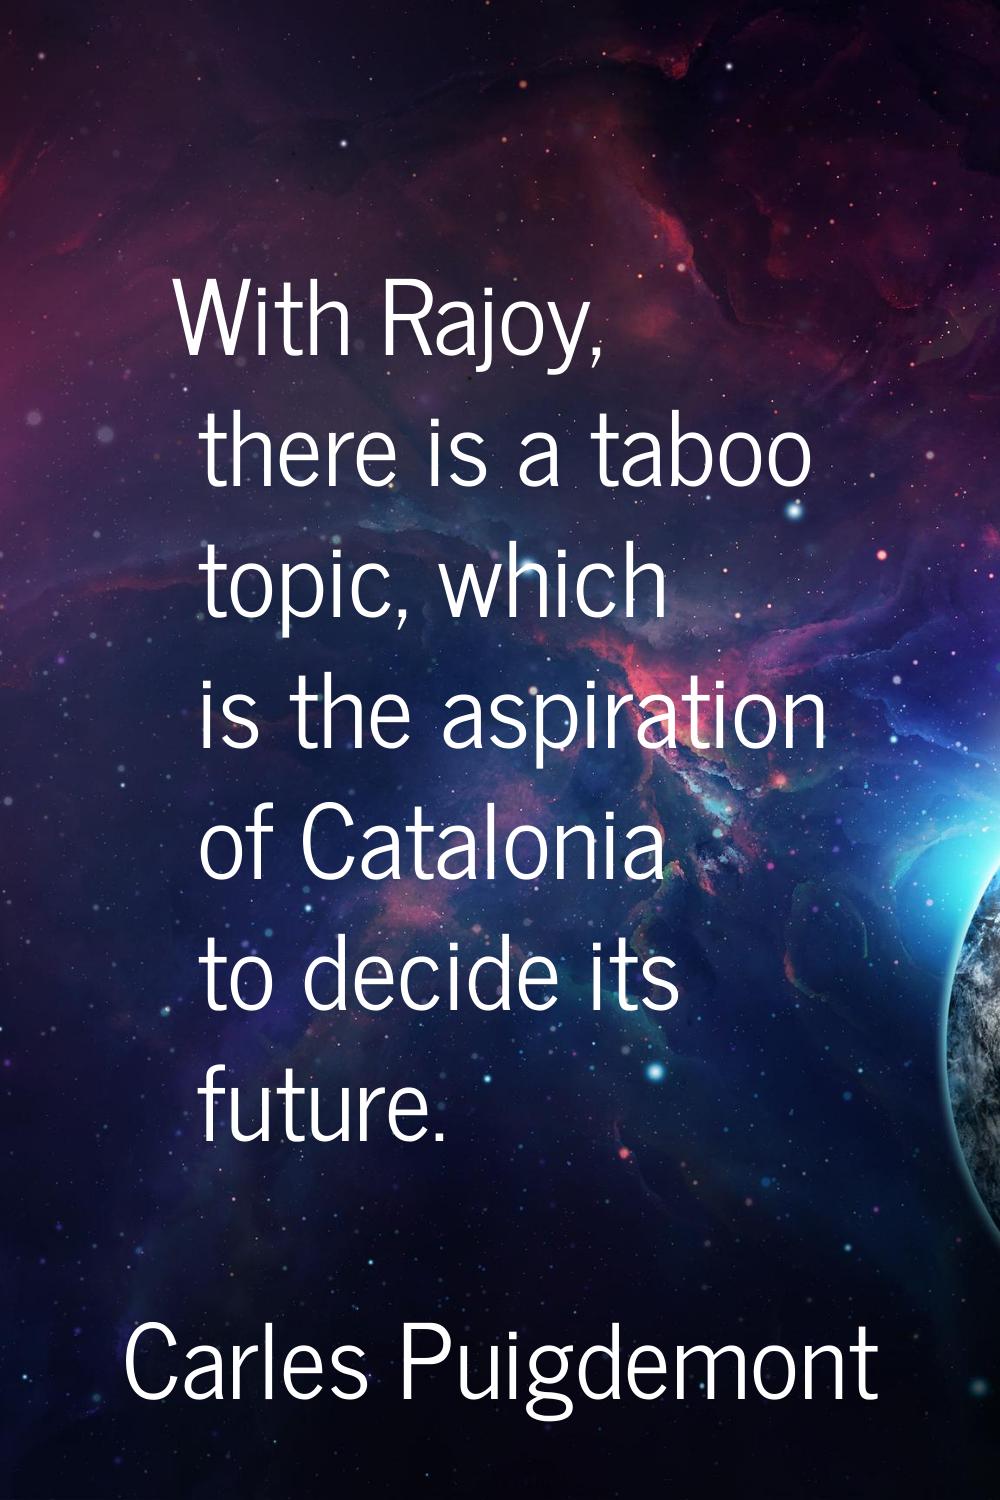 With Rajoy, there is a taboo topic, which is the aspiration of Catalonia to decide its future.